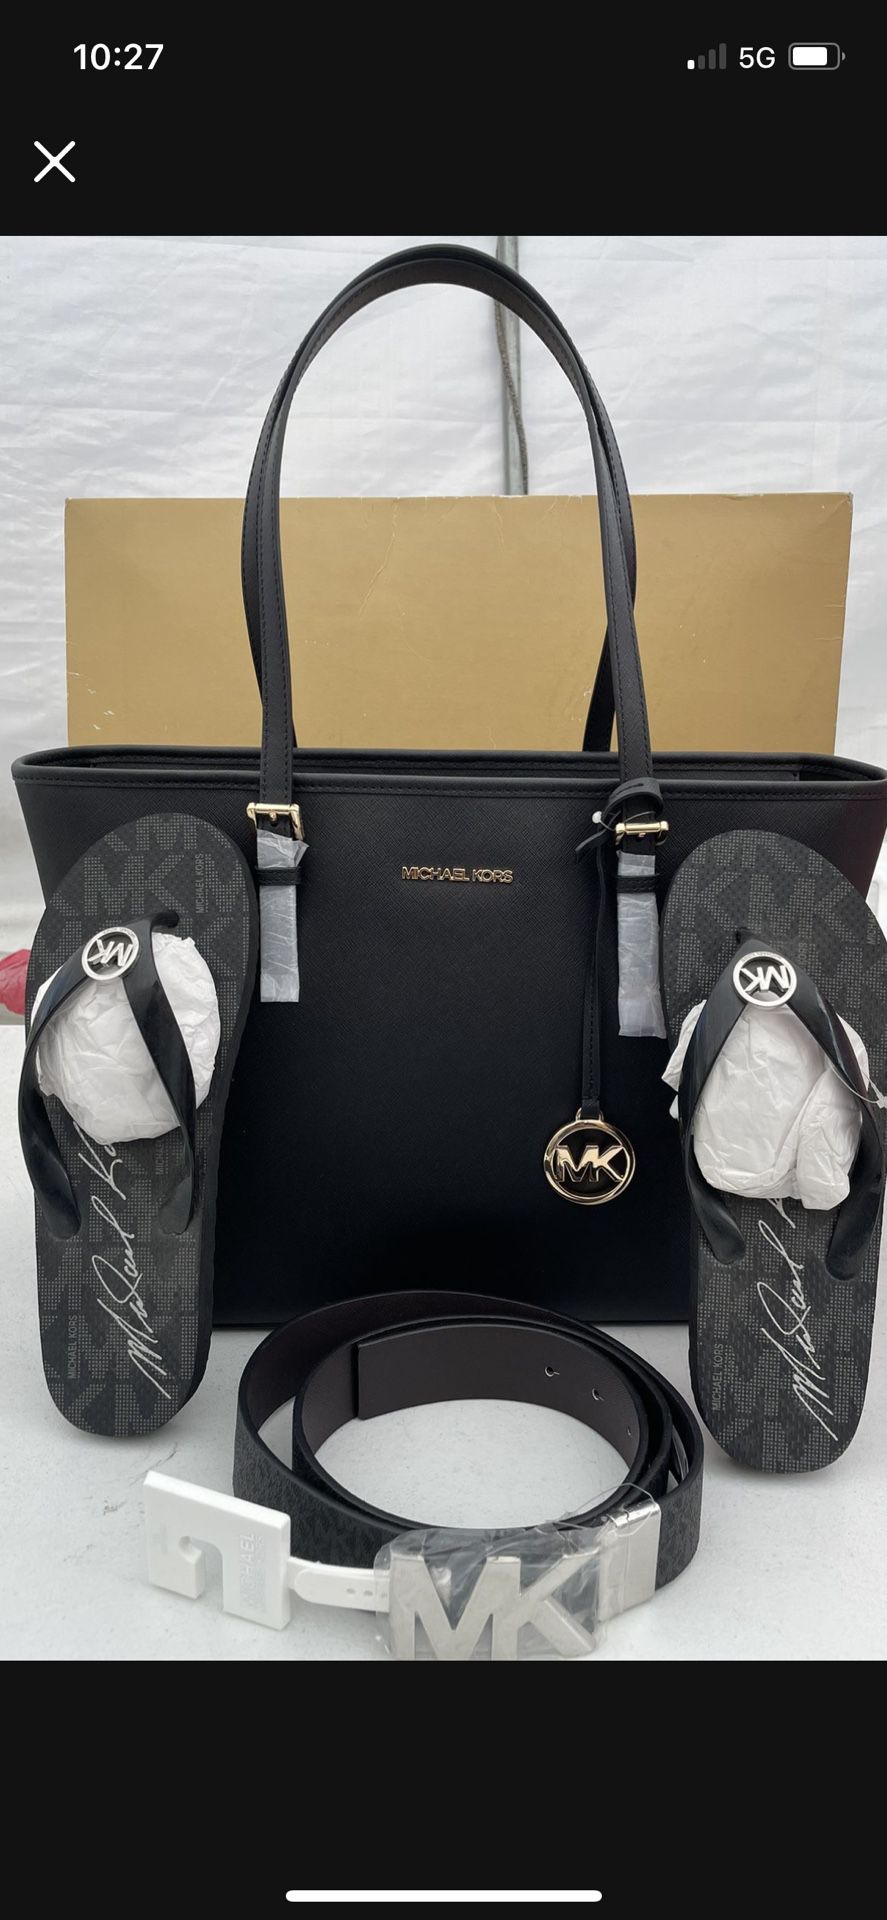 Michael Kors Set NWT flip flops size 9 Michael Kors belt size X-Large  Perfect gift 🎁  Serious inquiries only  Pick up location in the city of Pico R